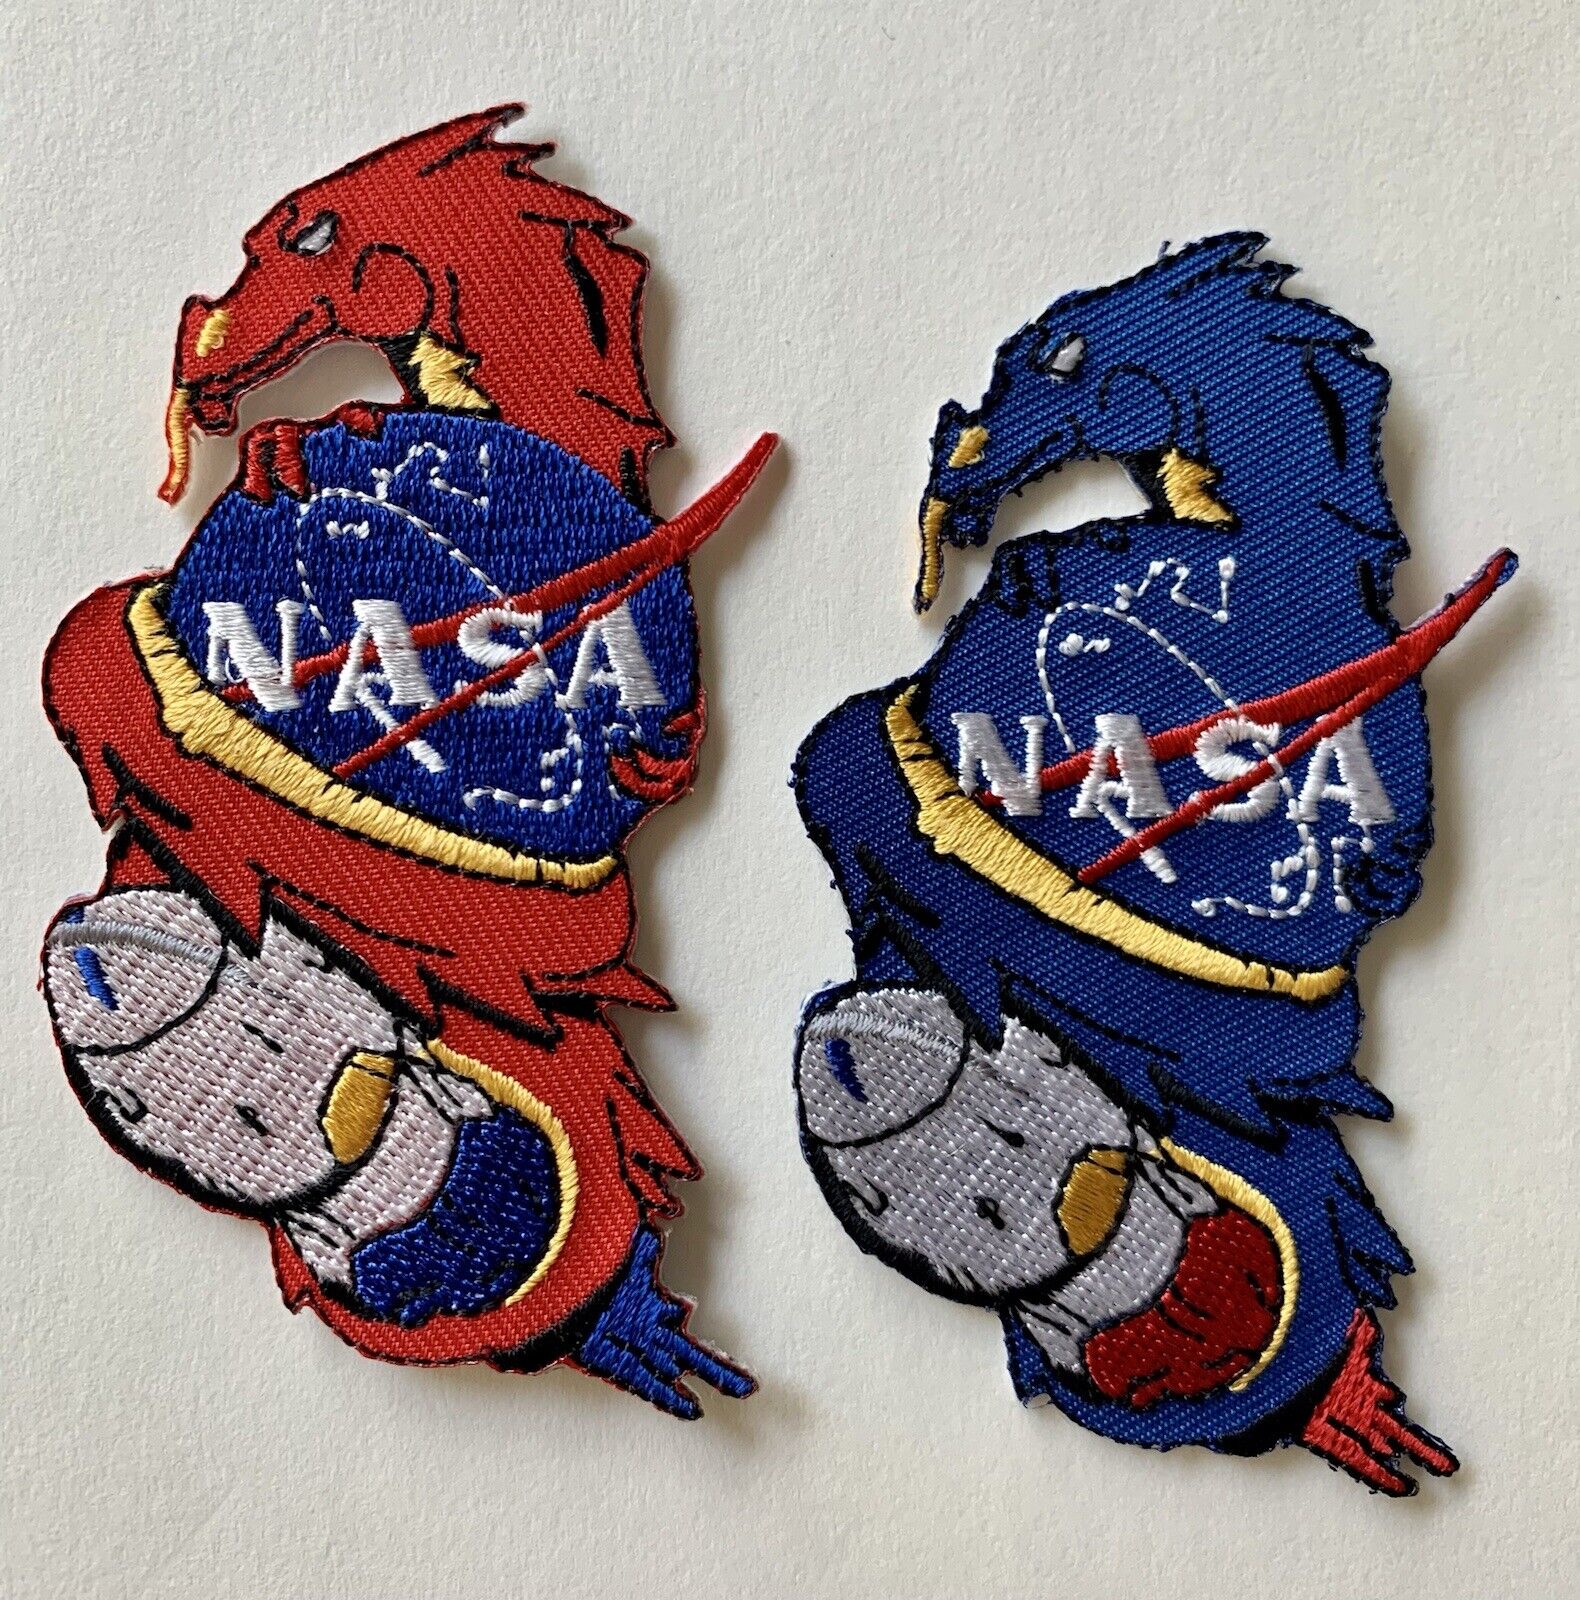 COMBO Original SpaceX NASA Double Dragon DM-2 Crew Mission Patch 